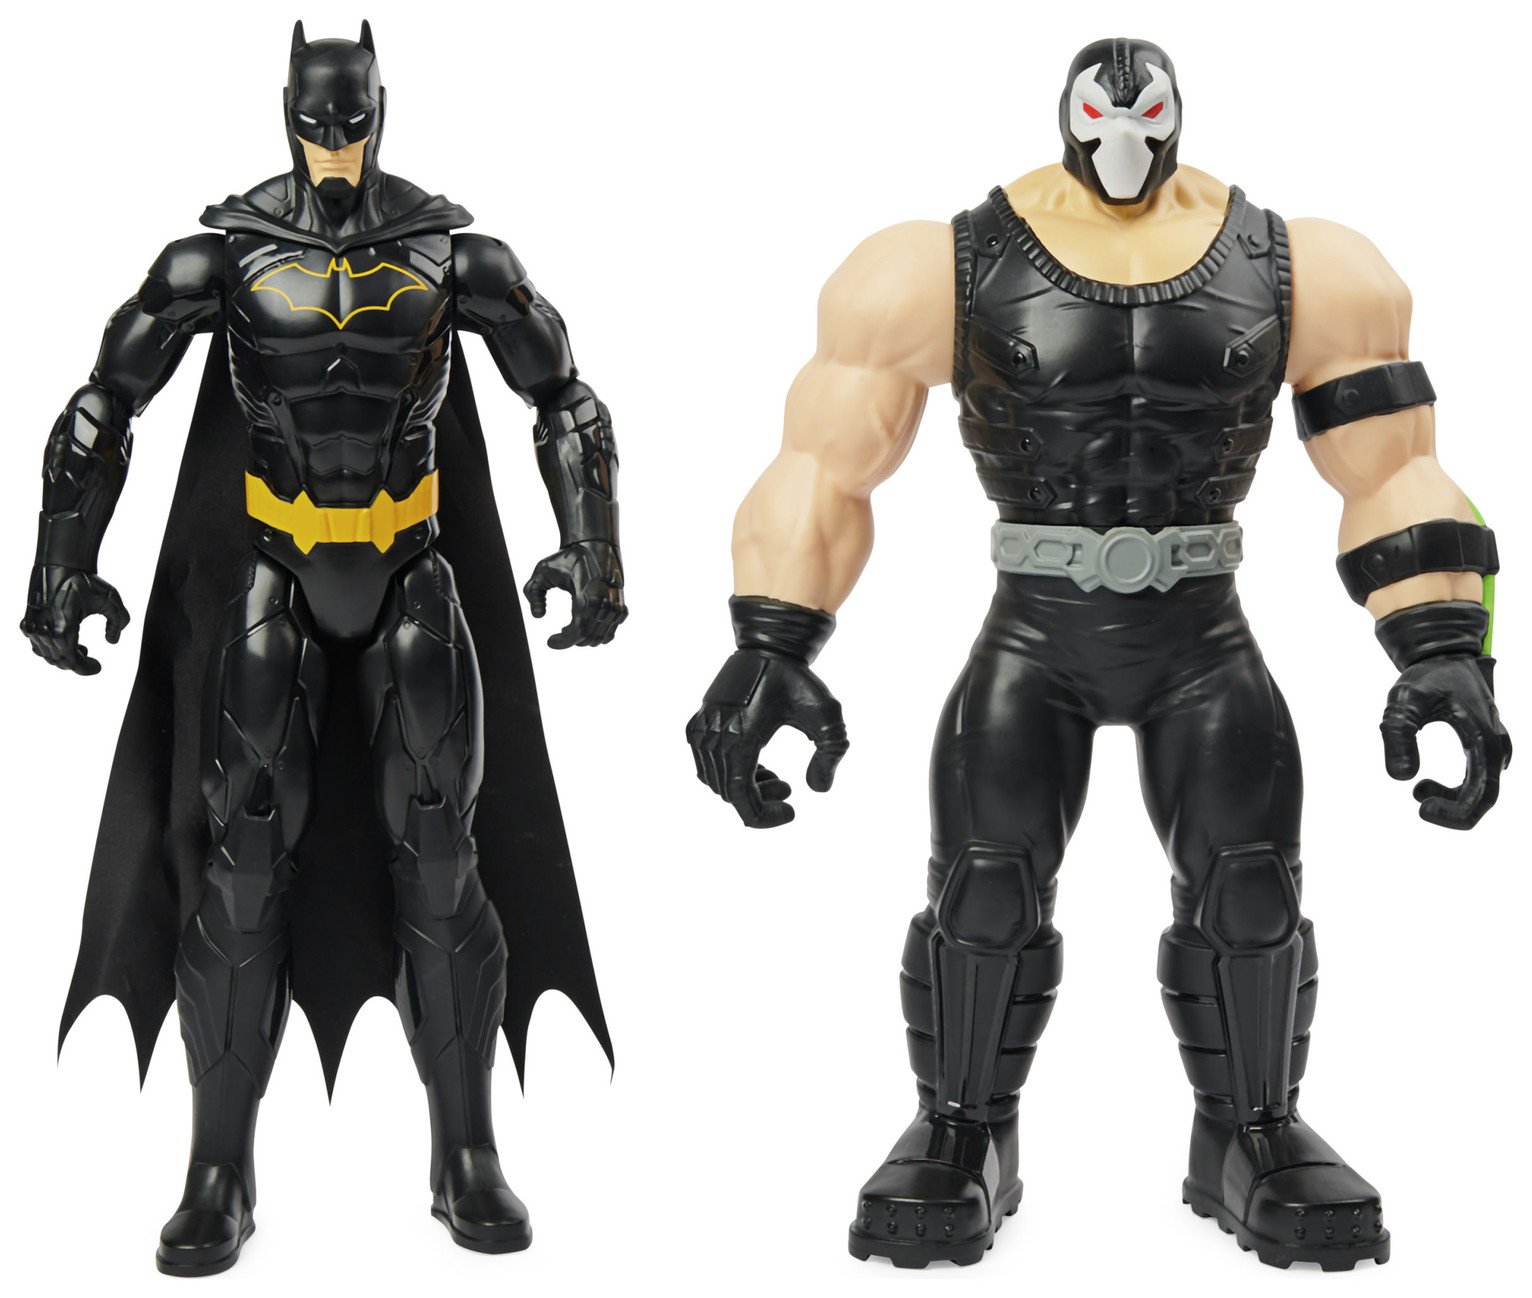 DC Comics Batman and Bane 12 Inches - Pack of 2 Figures